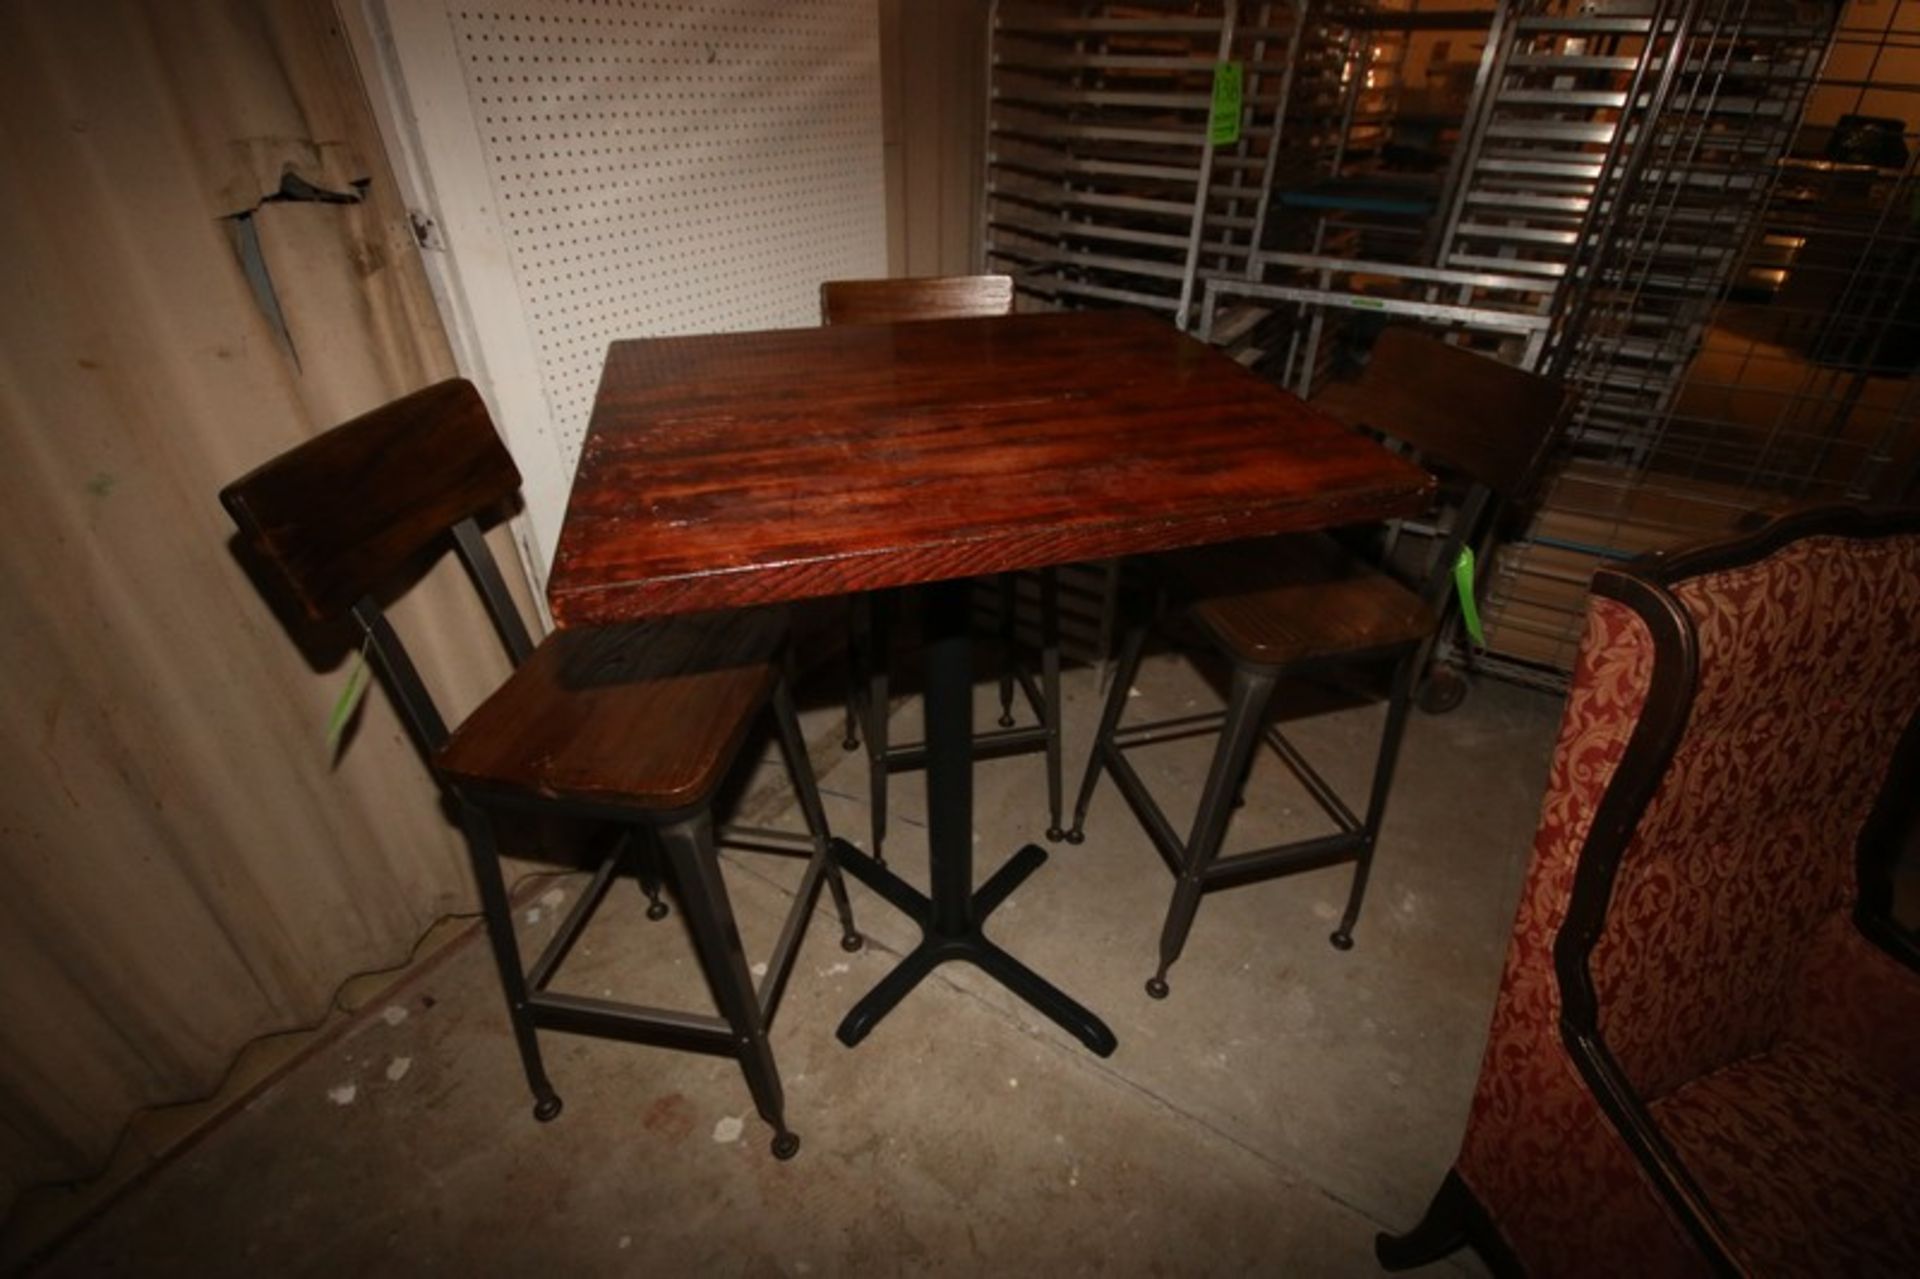 High Top Table Set, with (3) High Stool Chairs, with (1) High Top Table, Table Top to Floor: